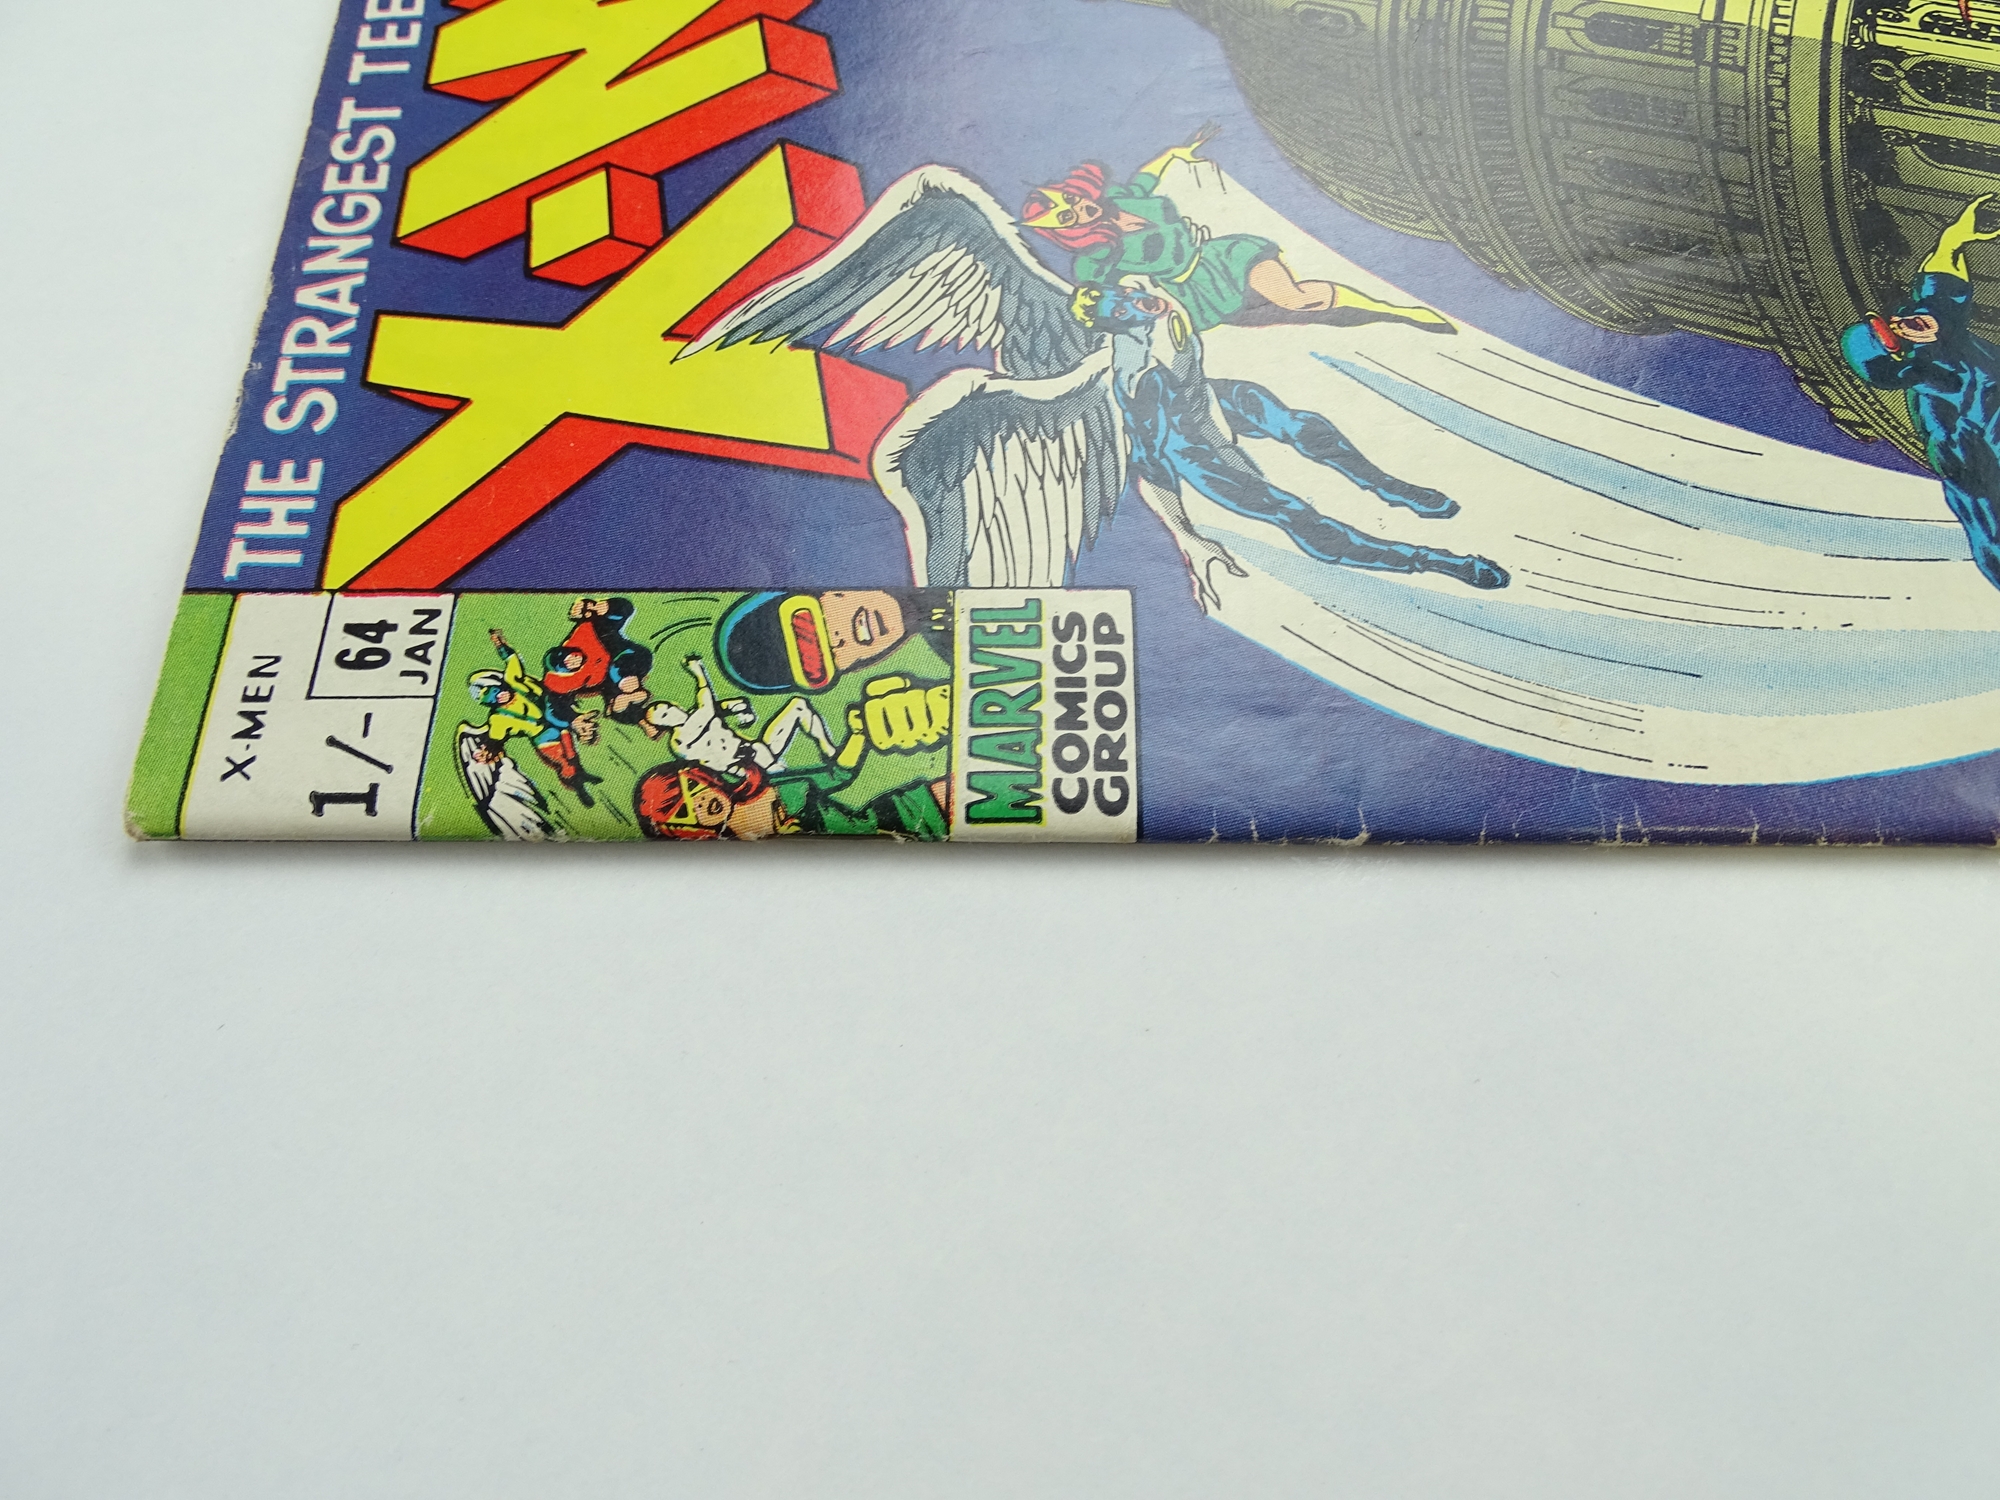 UNCANNY X-MEN # 64 - (1970 - MARVEL - Pence Copy) - First appearance of Sunfire - Tom Palmer cover - Image 6 of 7